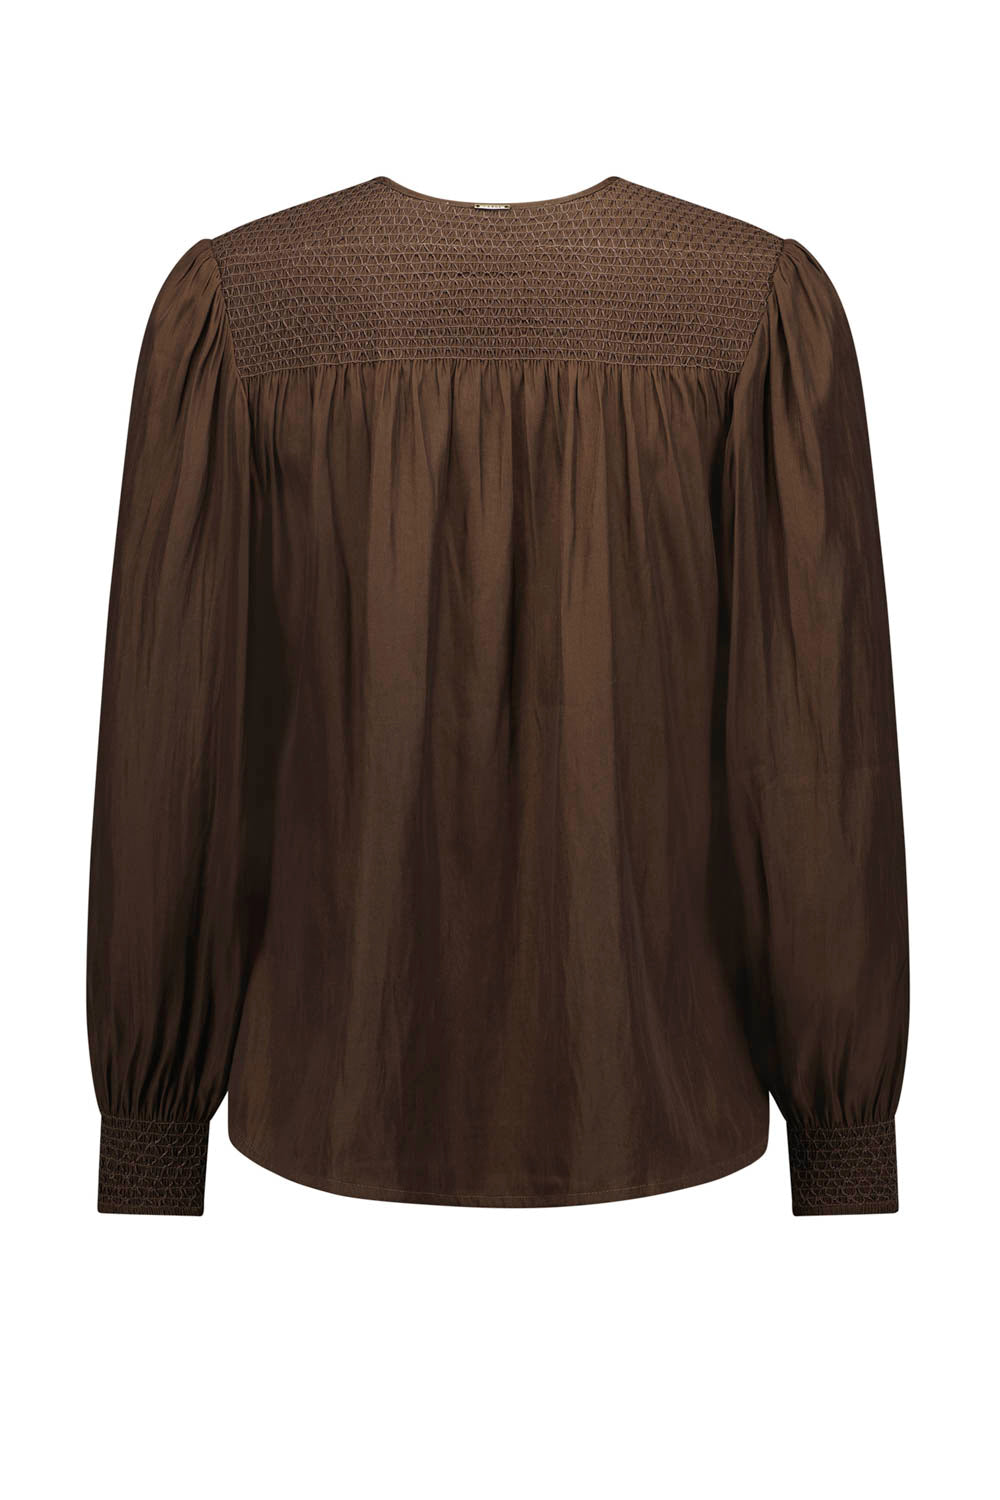 Glide by Verge - Tangled Blouse - Chocolate - Blouse VERGE